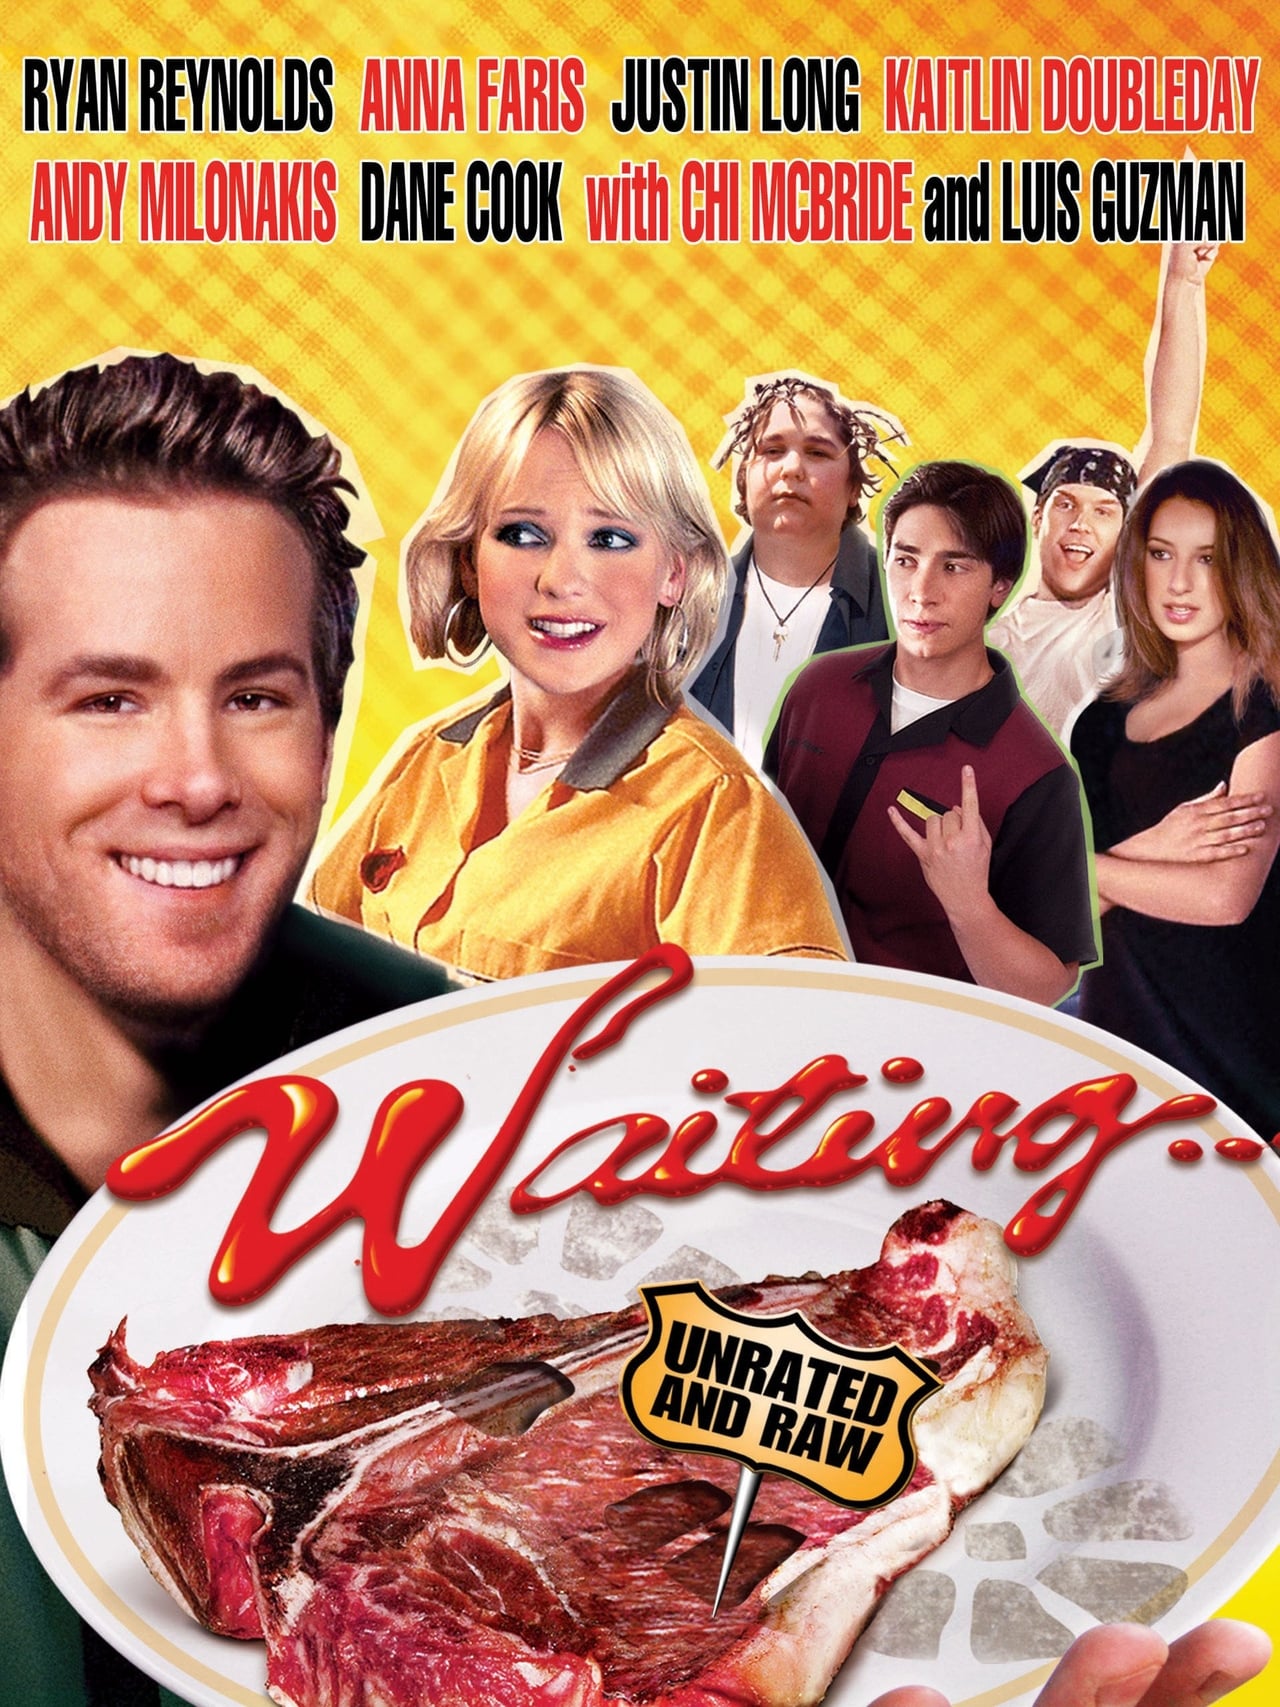 Waiting... (2005) Unrated Cut 640Kbps 23.976Fps 48Khz 5.1Ch DD+ NF E-AC3 Turkish Audio TAC